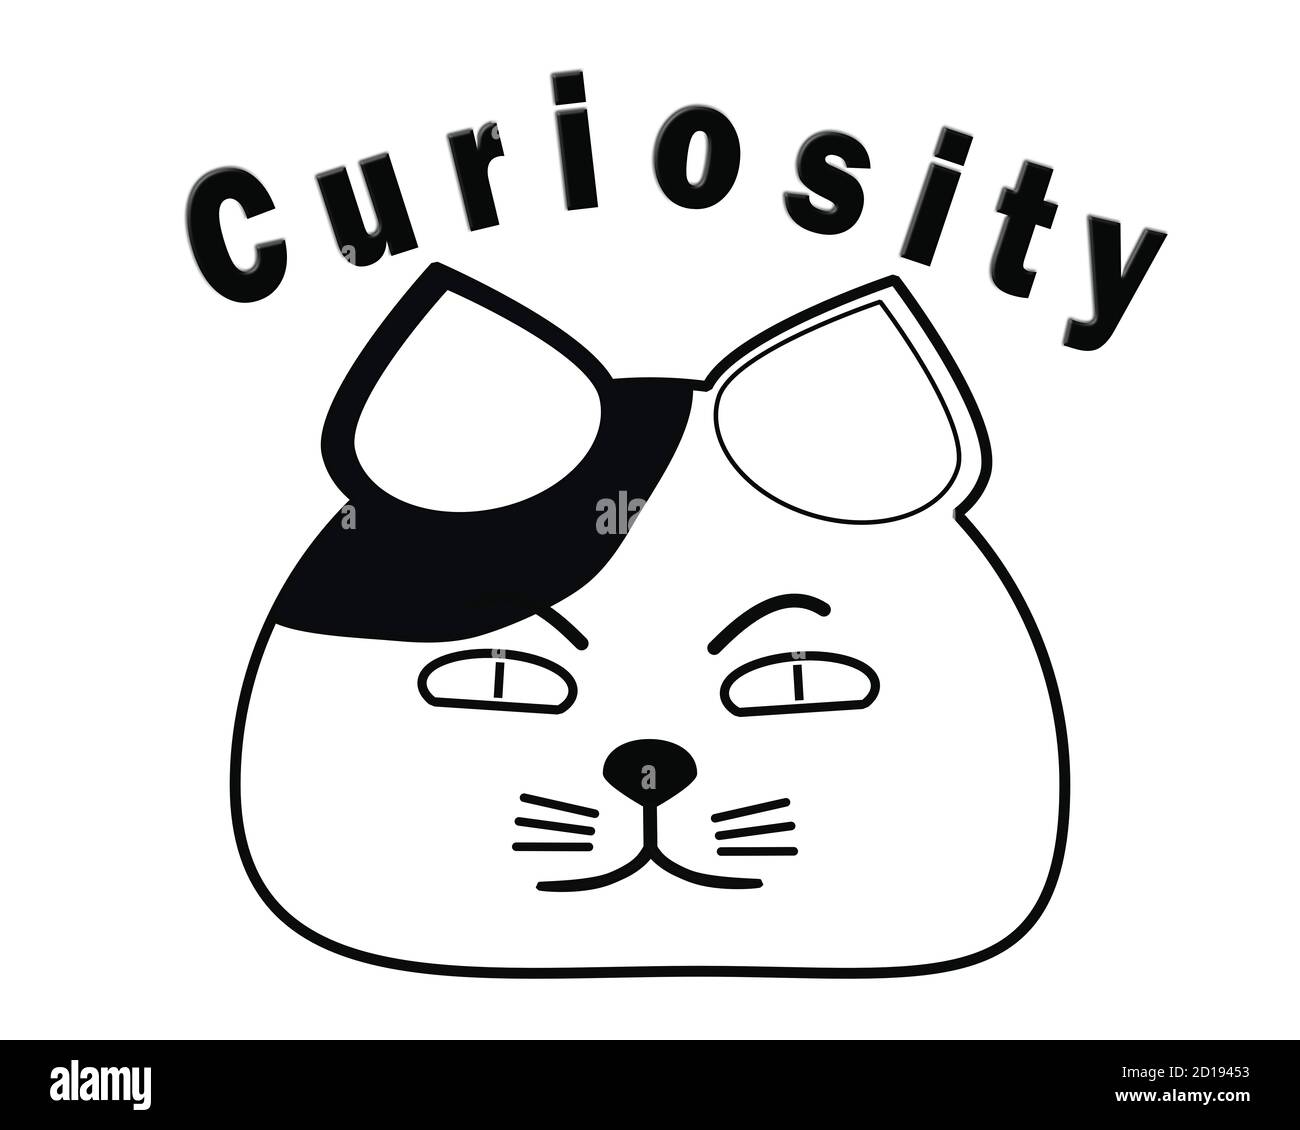 Curious Cat  - Education concept illustration depicts fat cat with insatiable curiosity for learning. Stock Photo